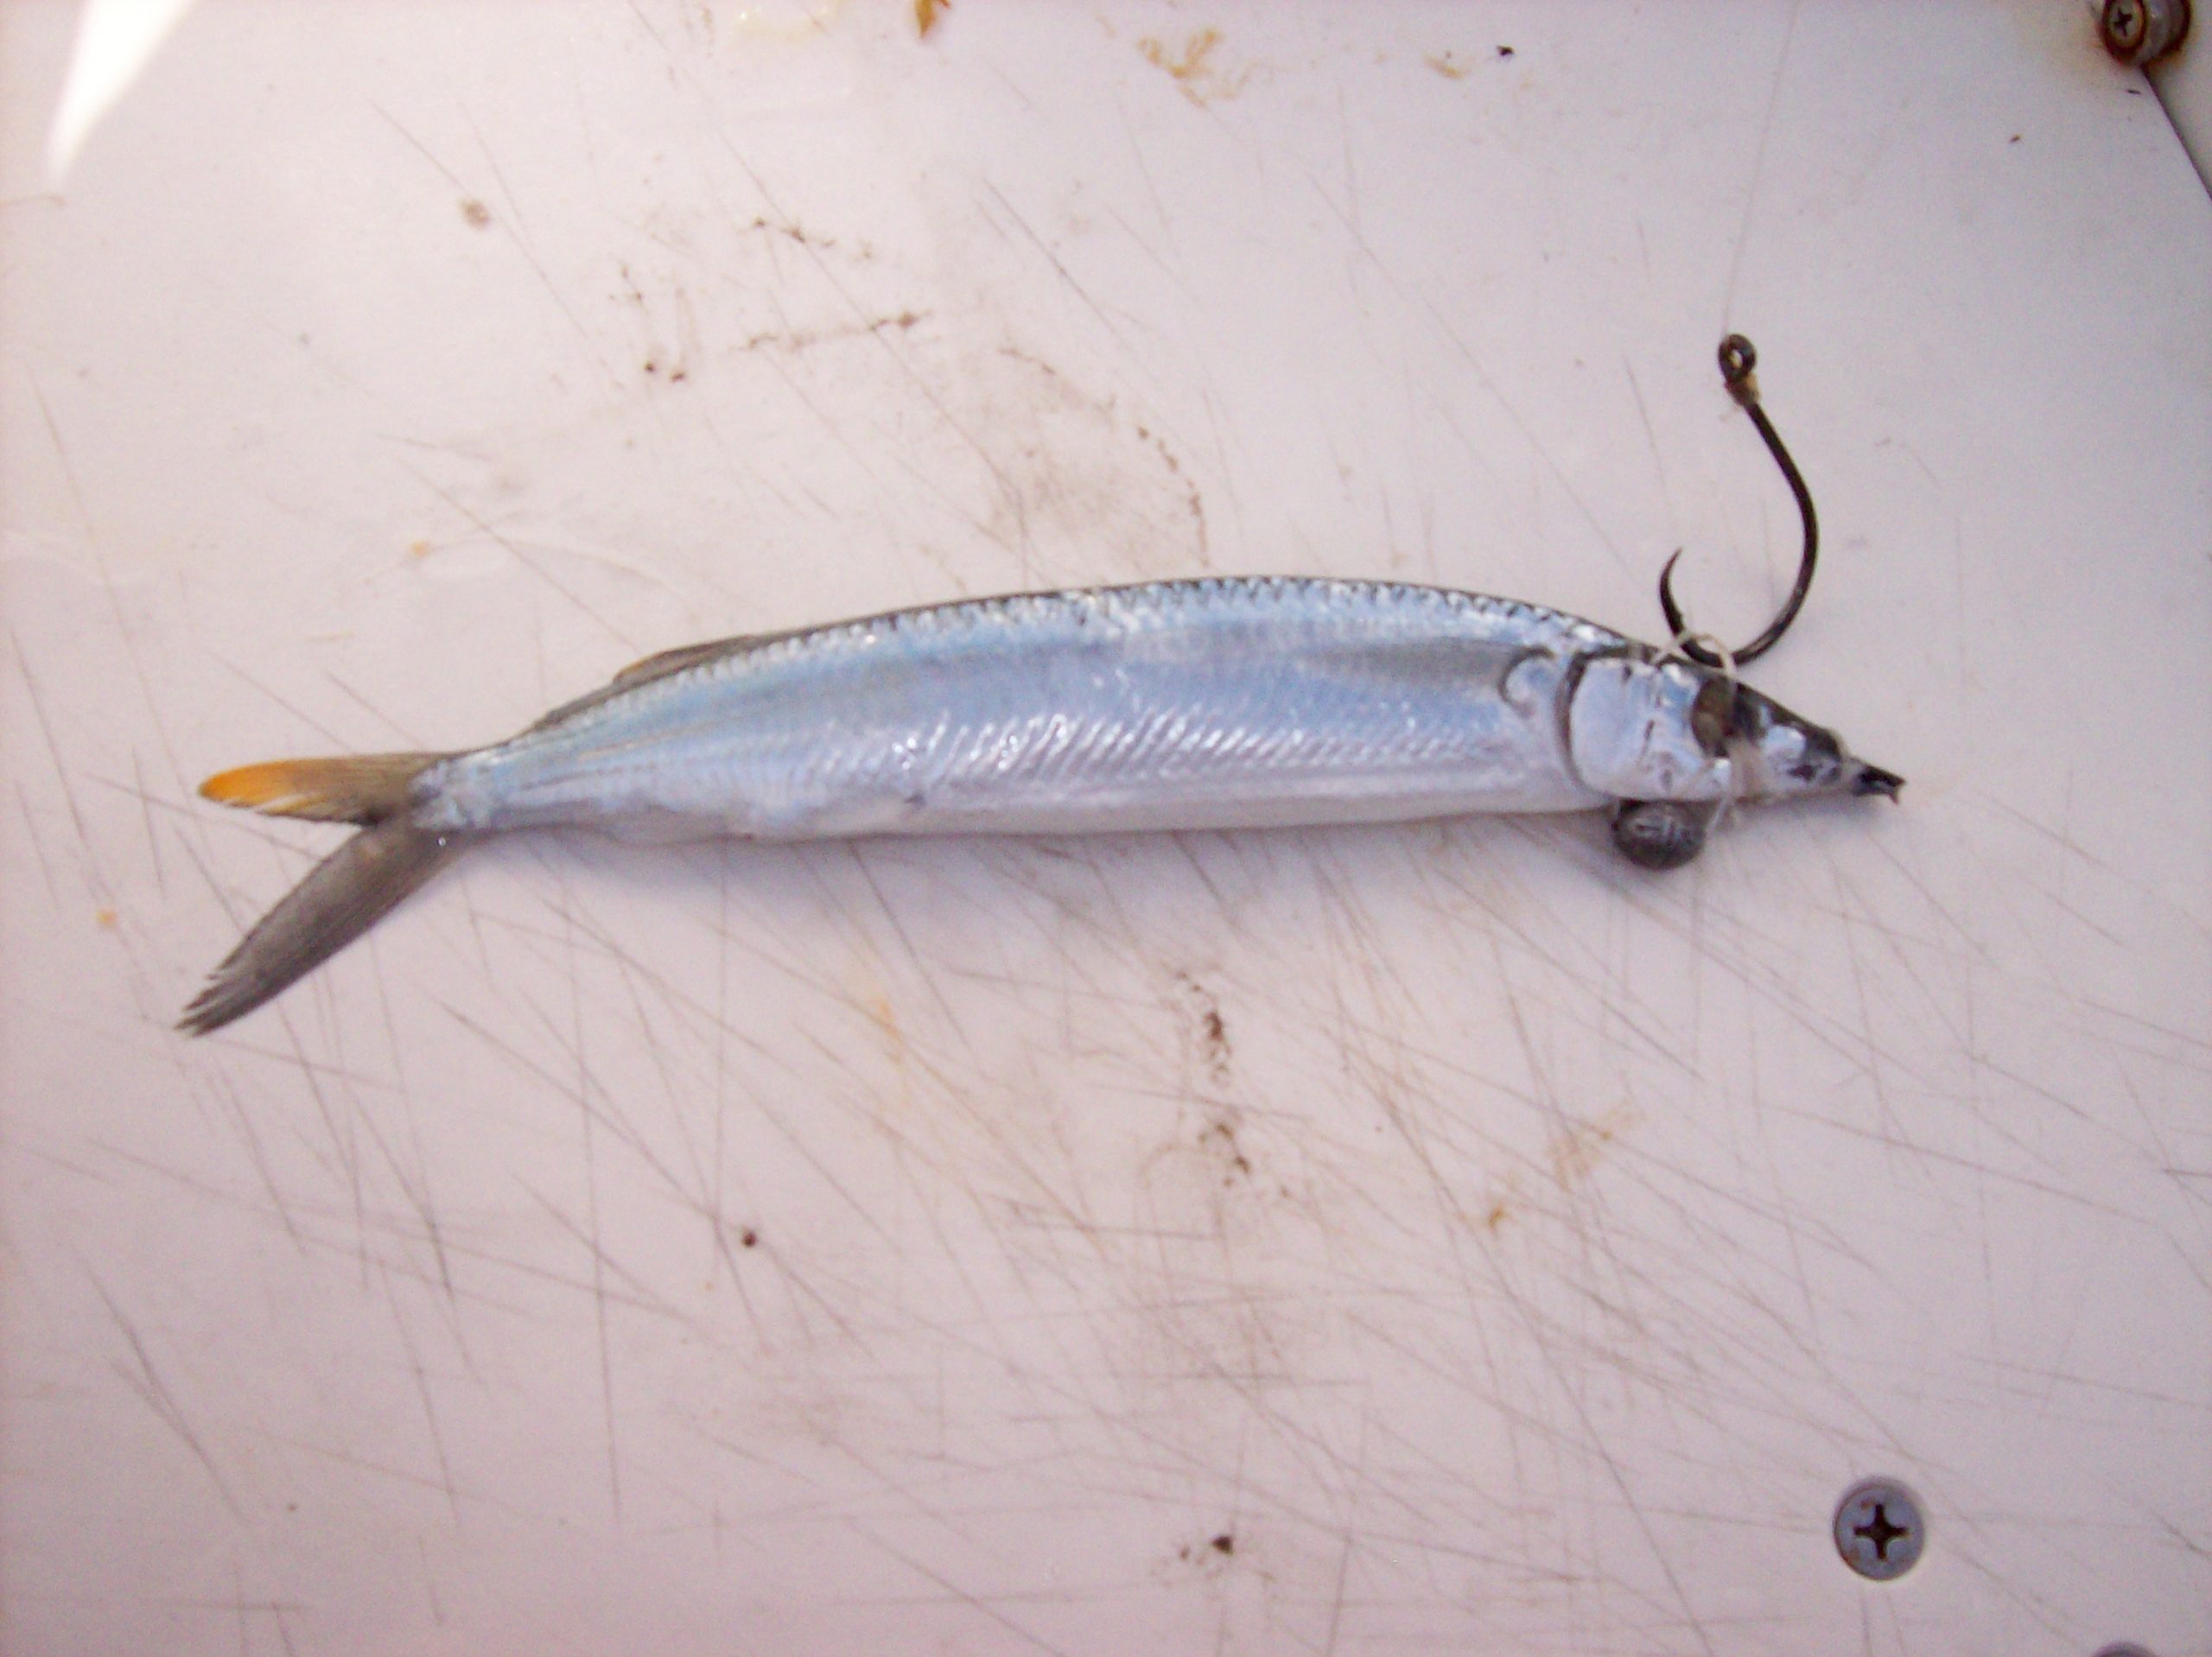 Circle hooks and rigging types used in a study of white marlin